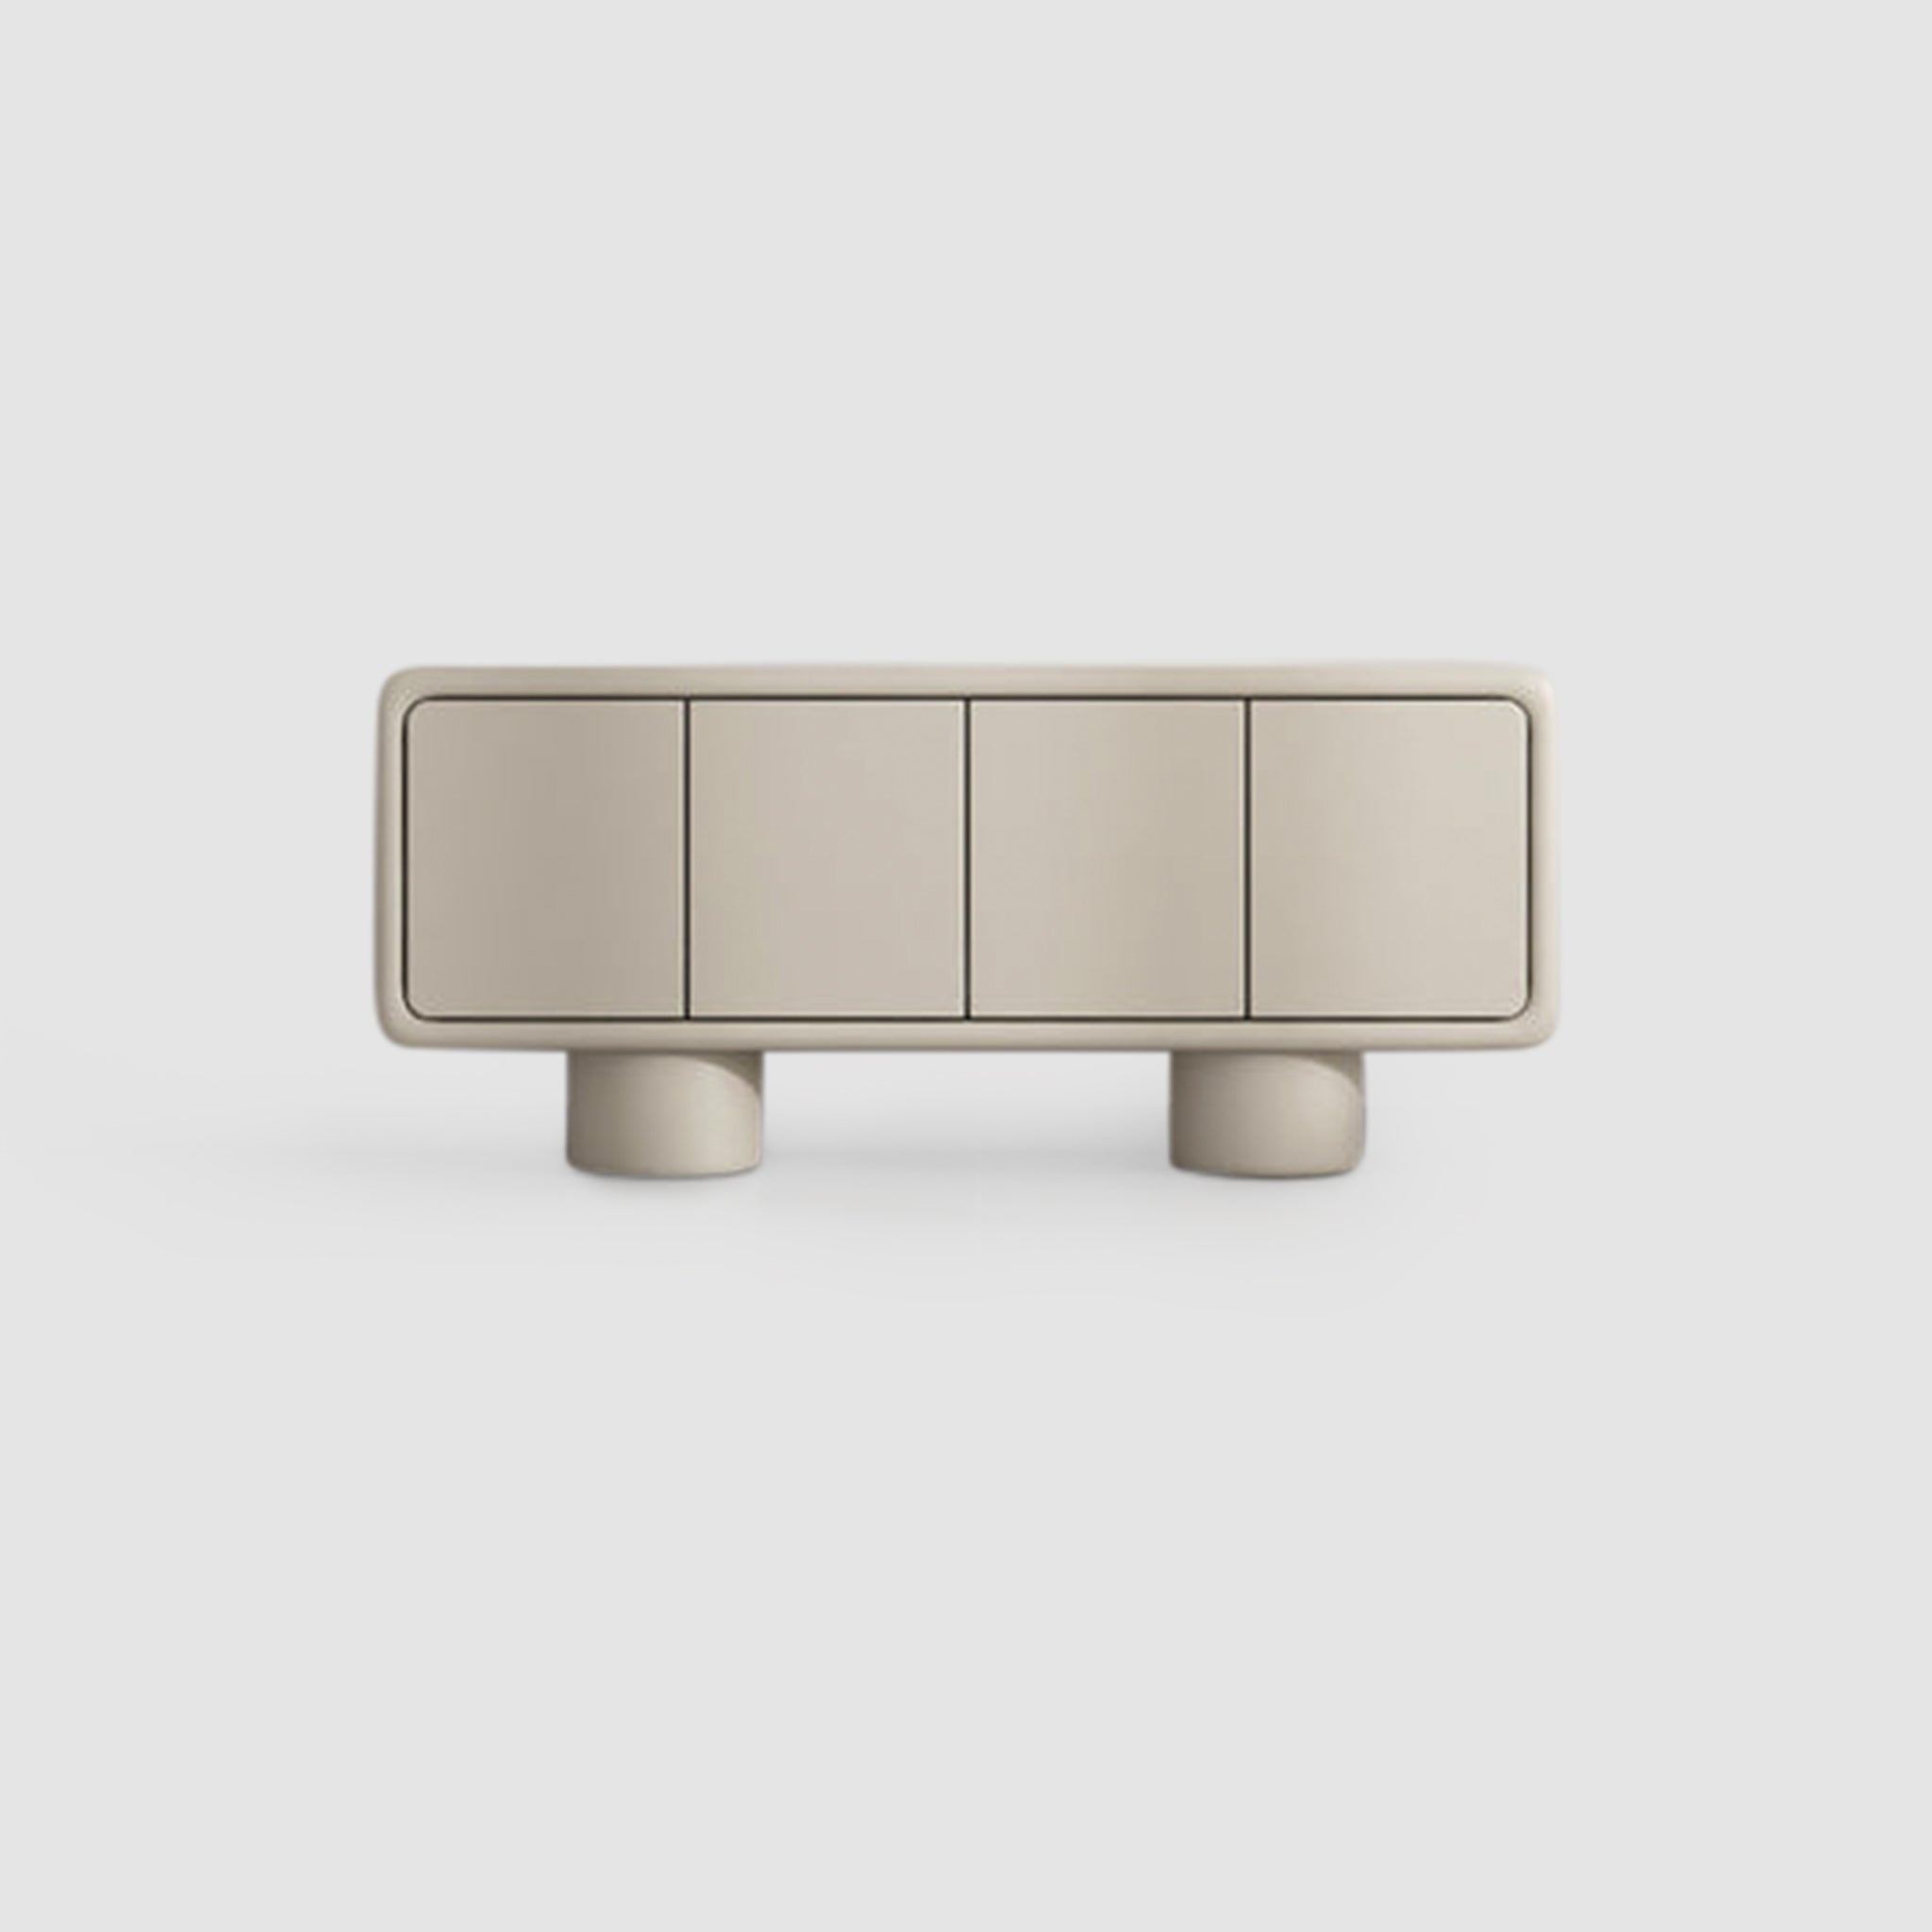 A sleek, modern sideboard in a neutral beige color, featuring four doors and supported by two cylindrical legs.